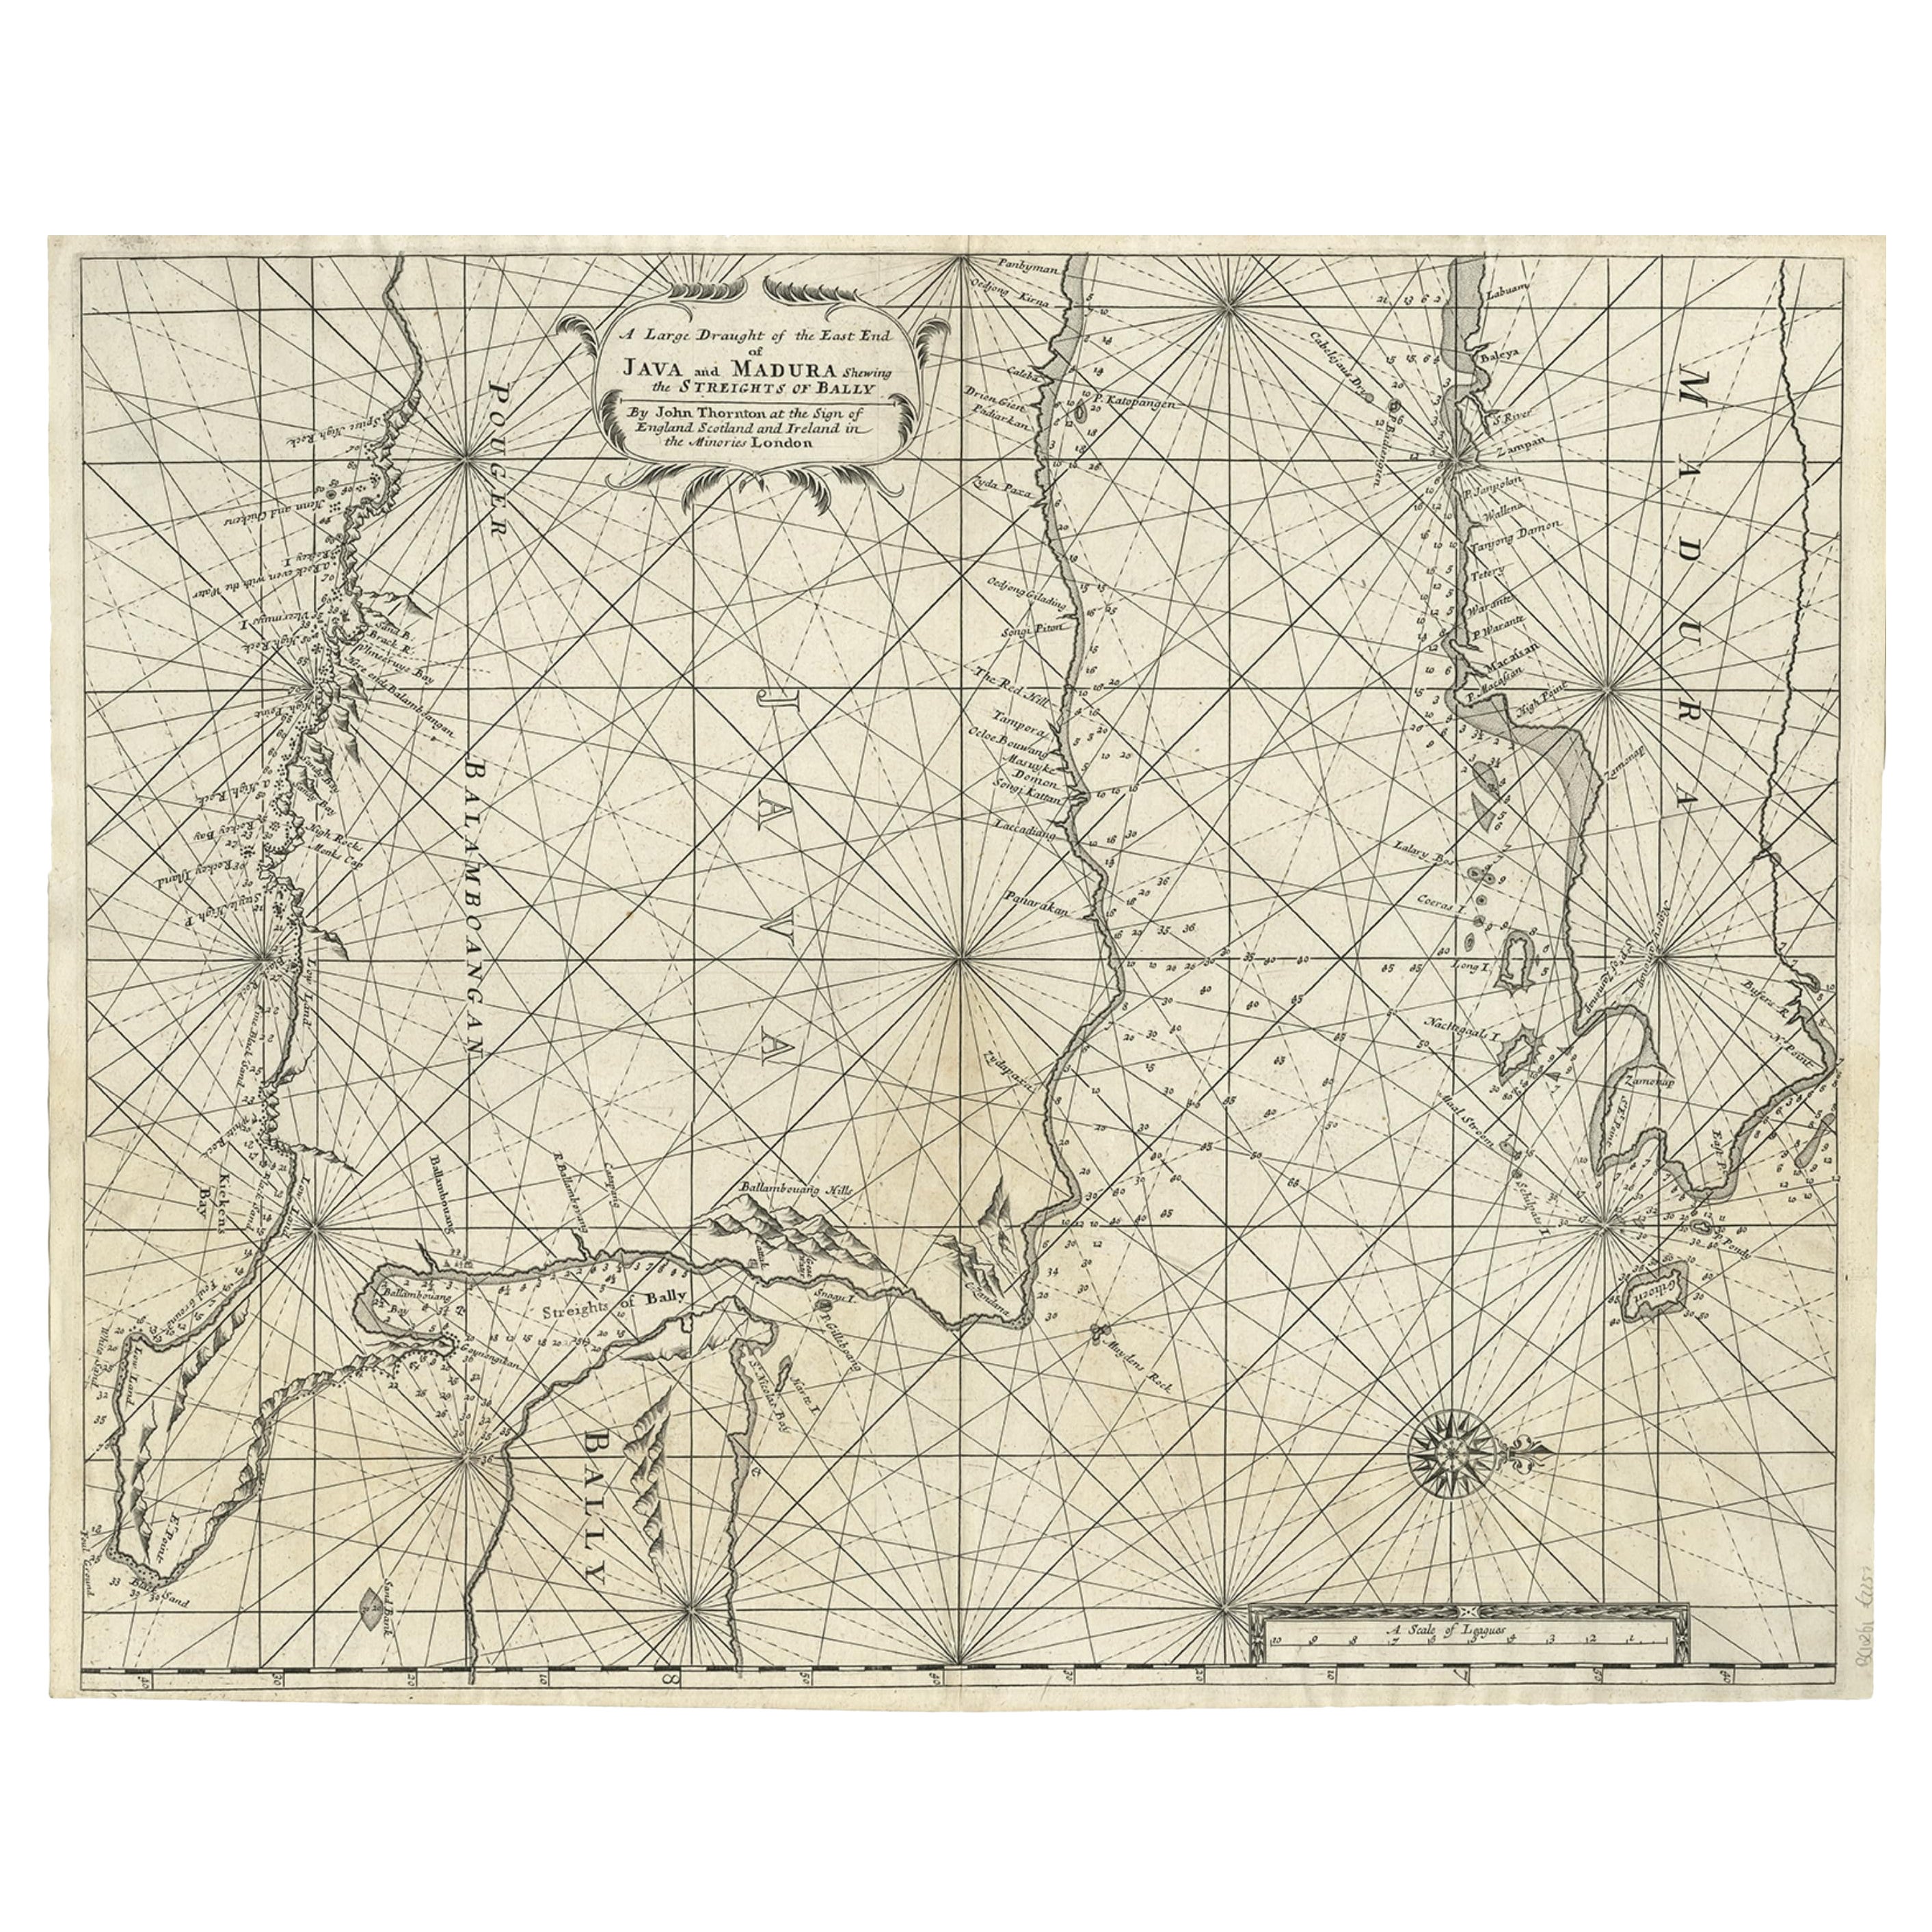 Rare Old English Sea Chart of Part of Indonesia with Java, Madura and Bali,  1711 For Sale at 1stDibs